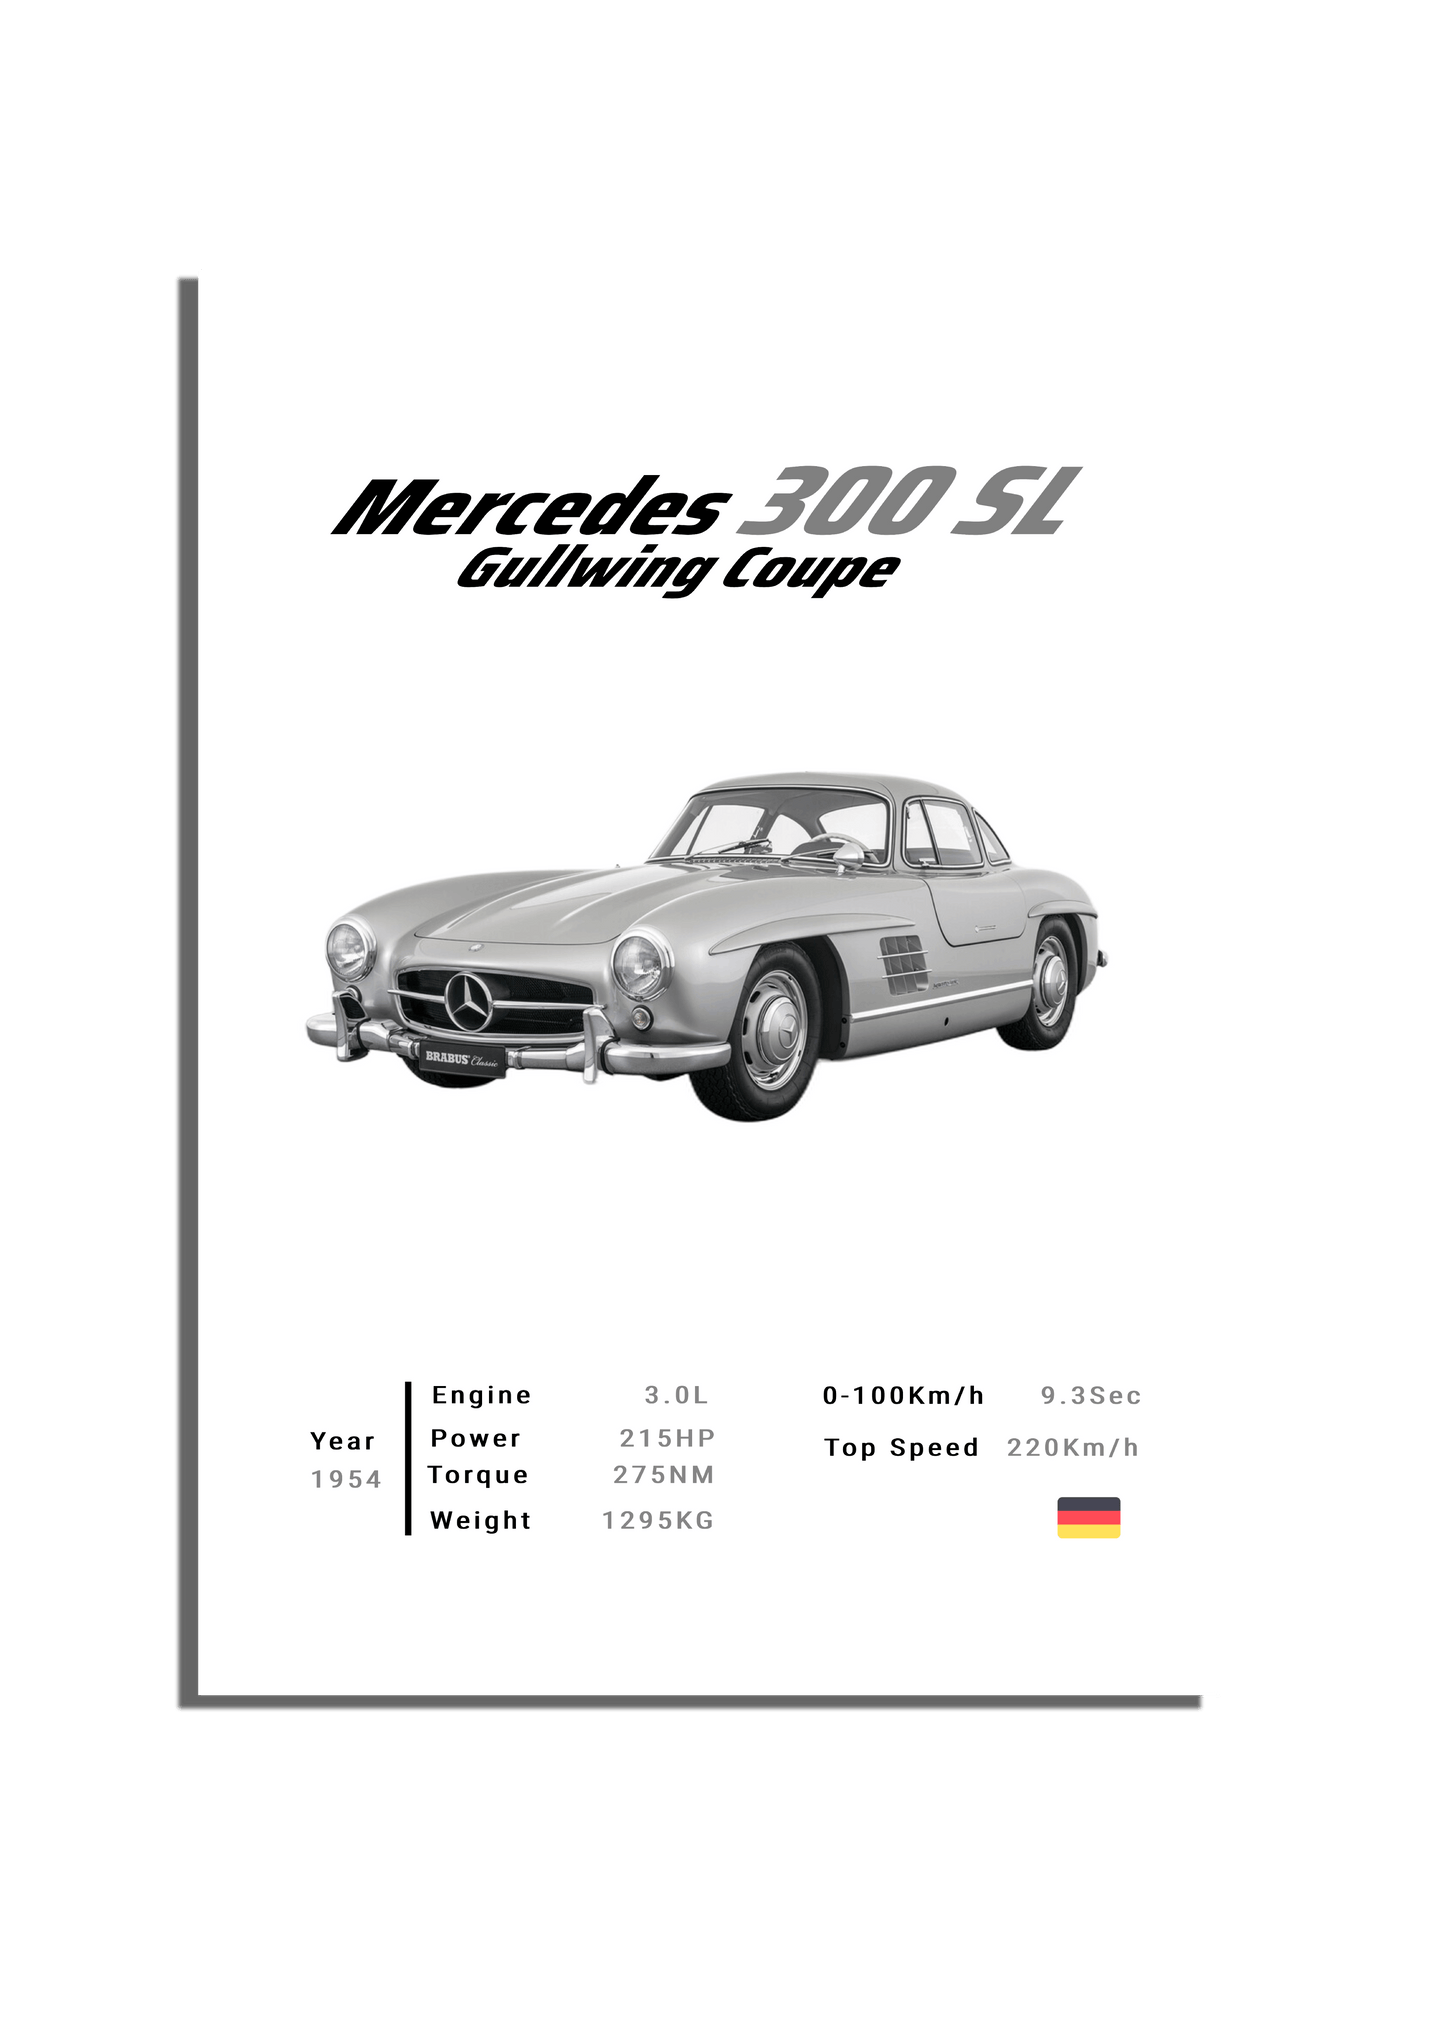 Mercedes 300 SL Gullwing Coupe